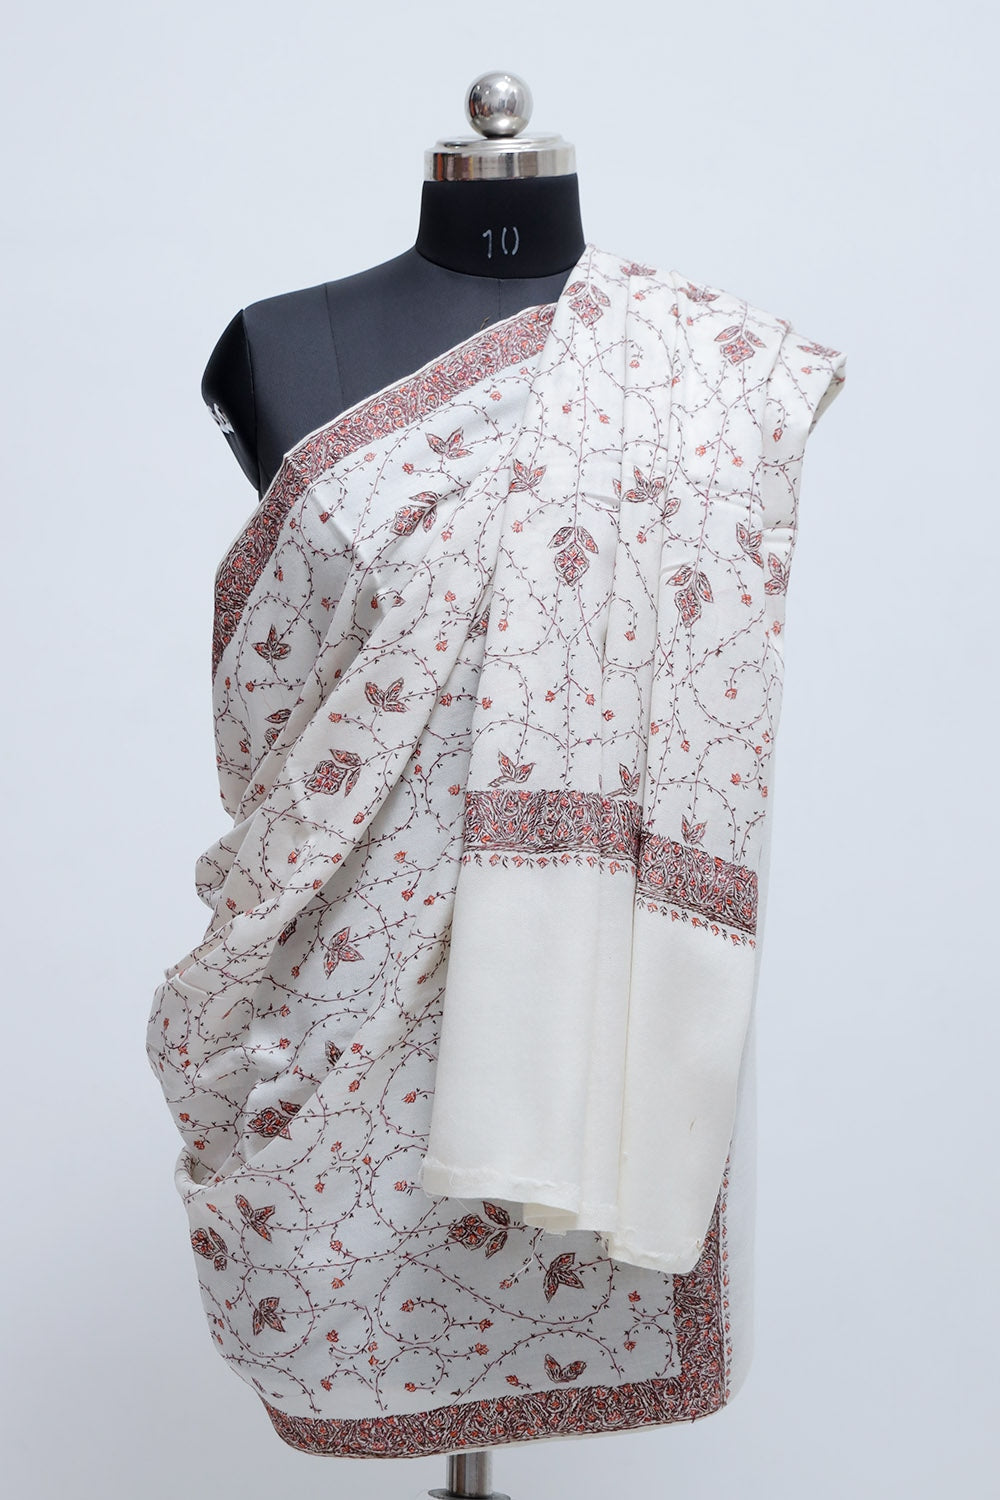 Off White Colour Semi Pashmina Shawl With Over All Jaal And